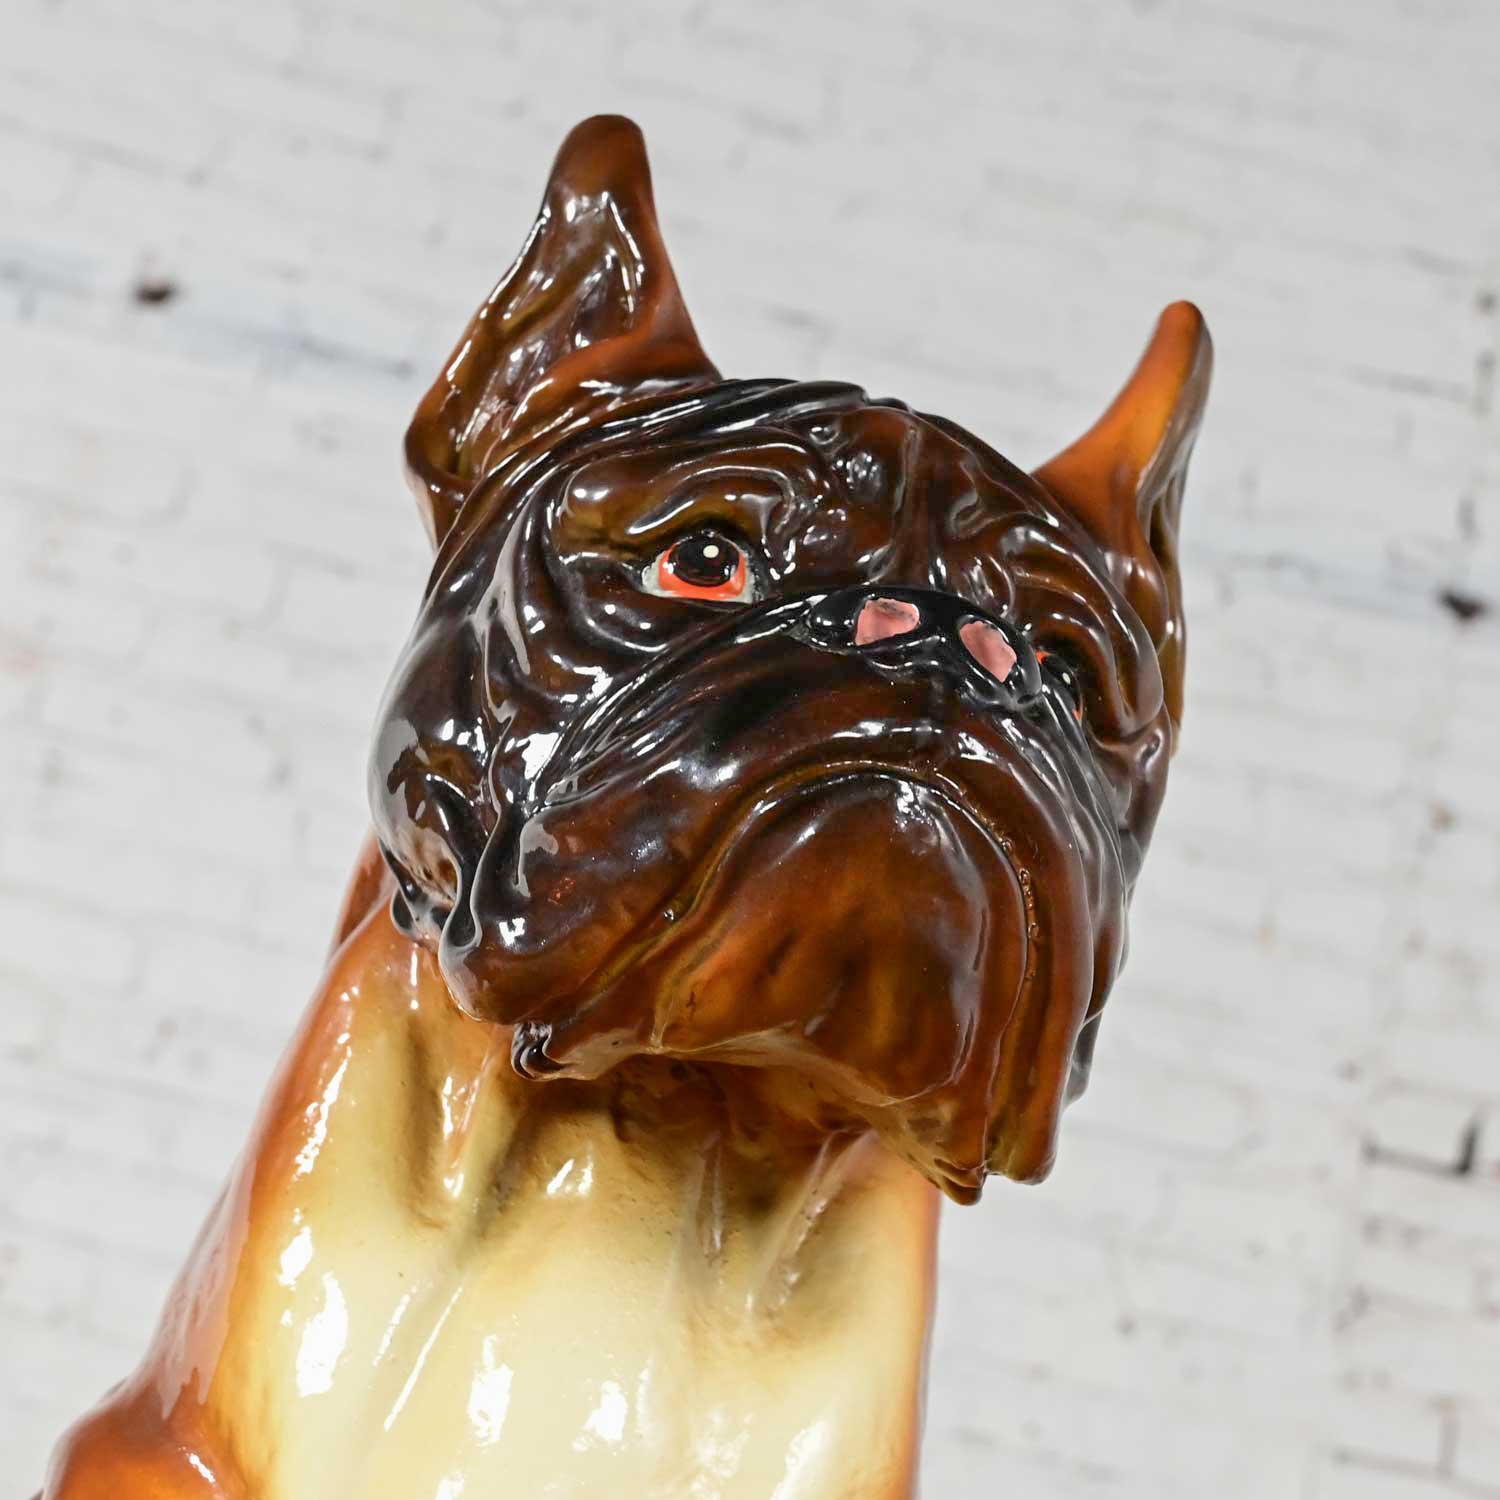 1970’s Large Scale Molded Resin Boxer Dog Statue or Sculpture Style of Marwal Industries